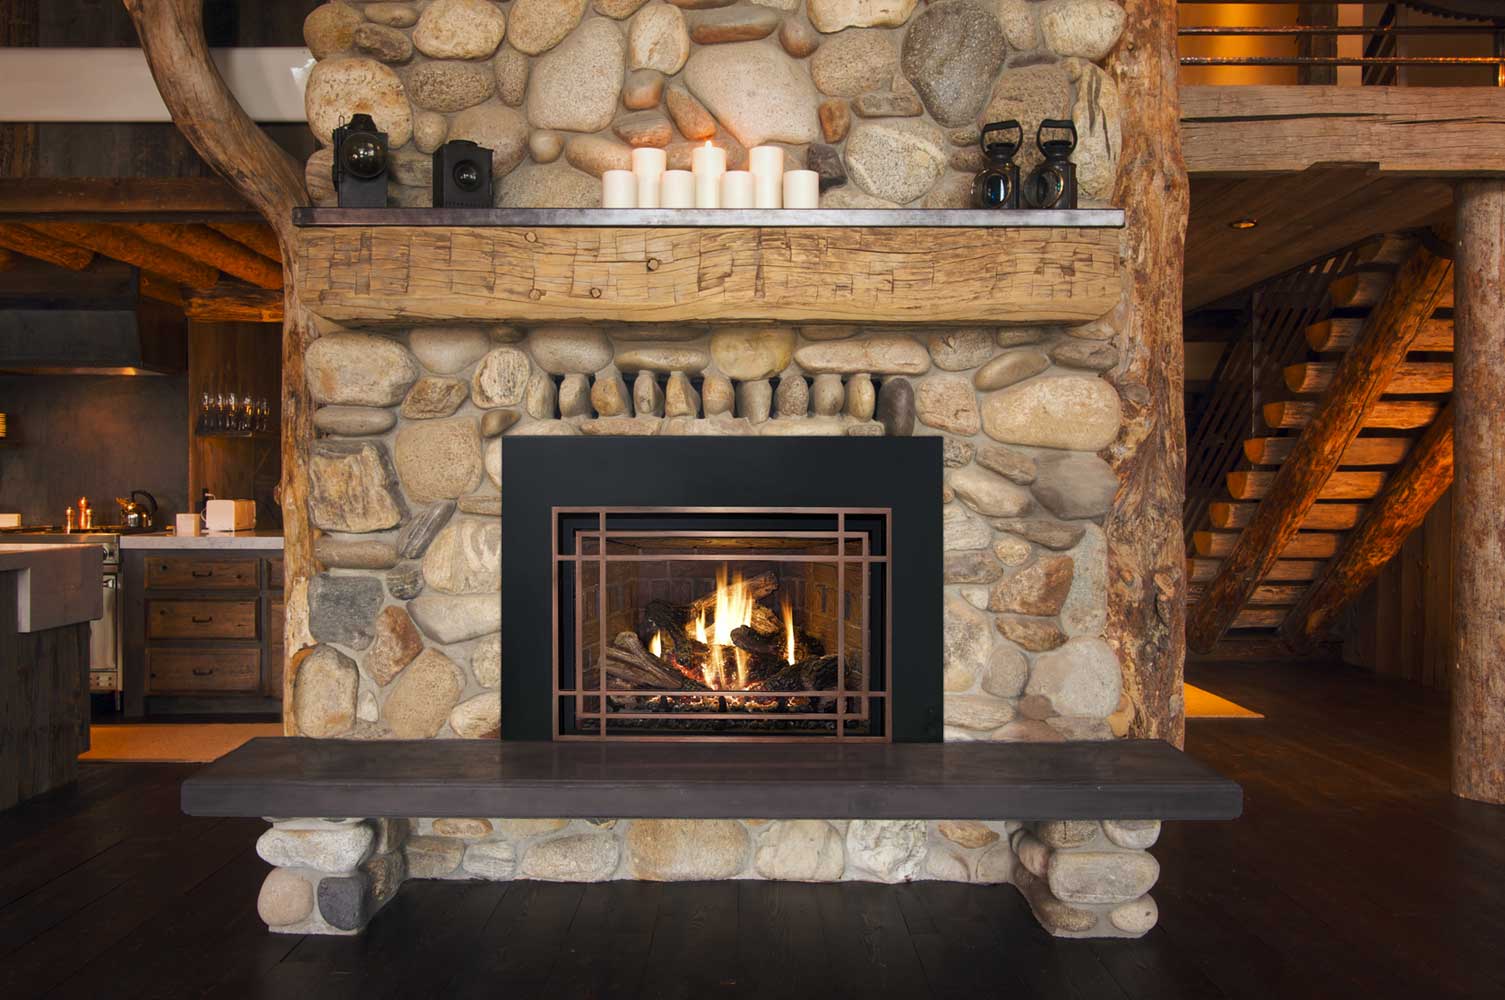 Fireplace made up with stones